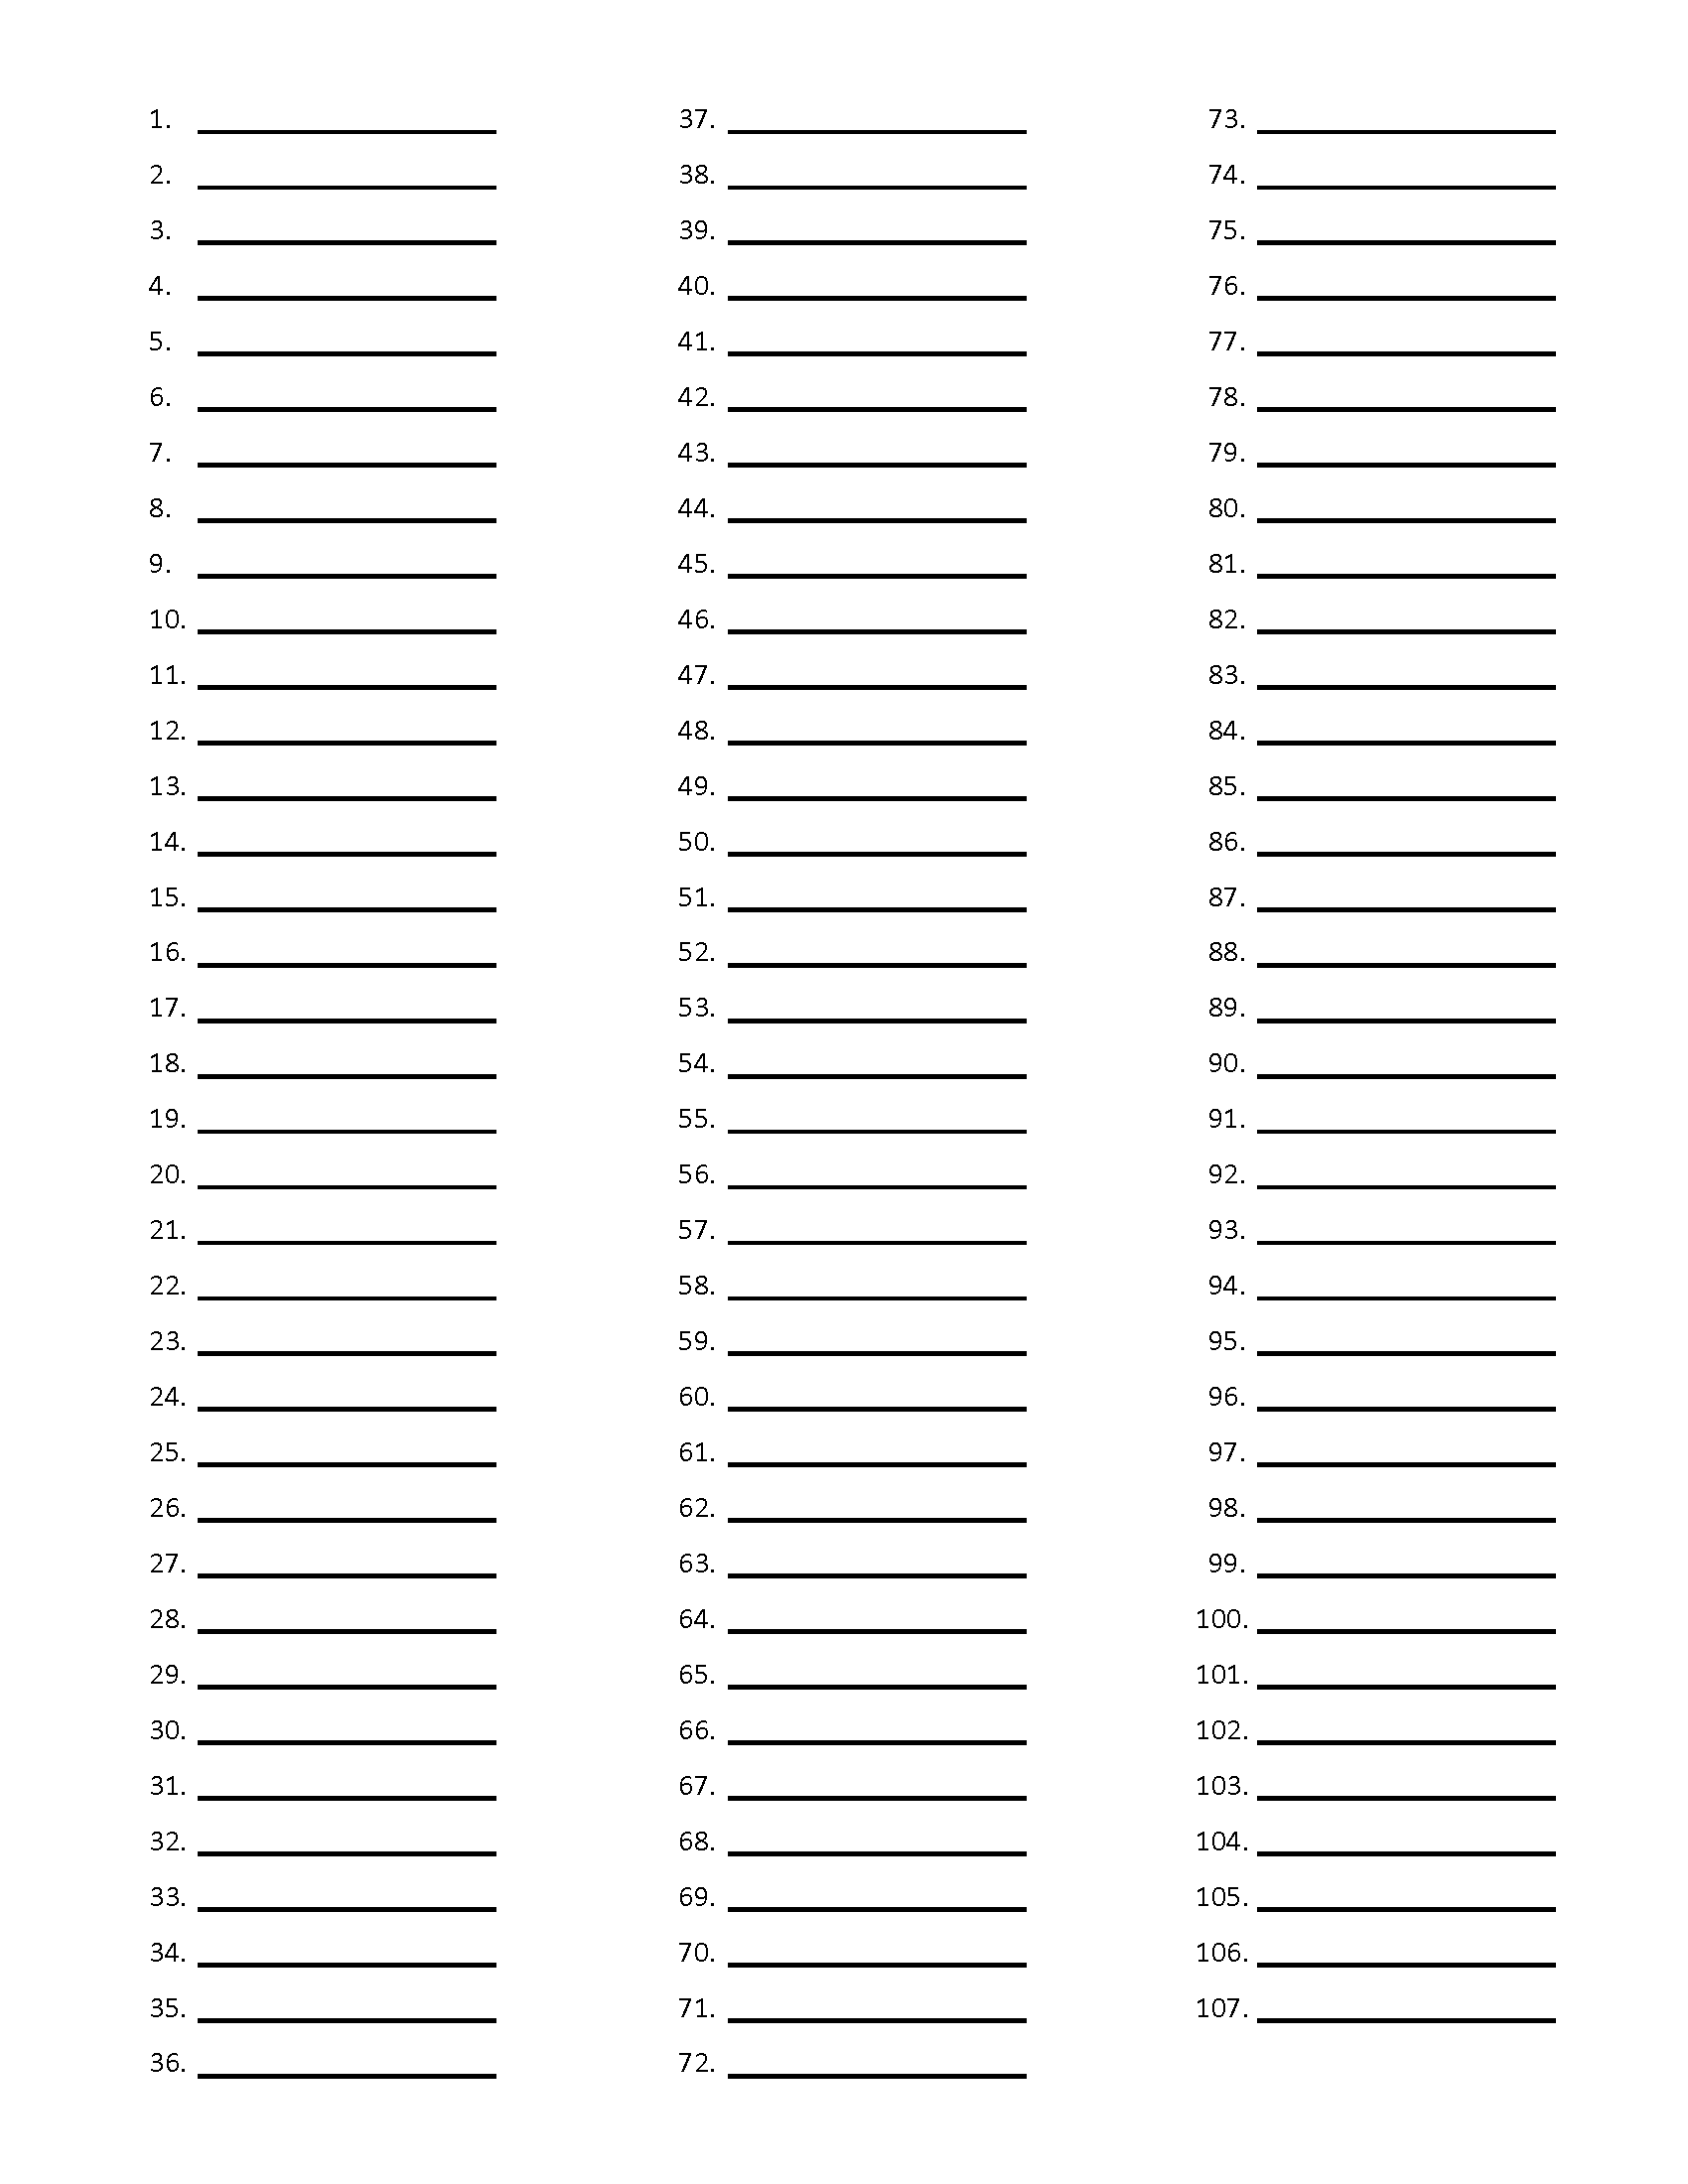 printable-blank-numbered-list-1-100-printable-form-templates-and-letter